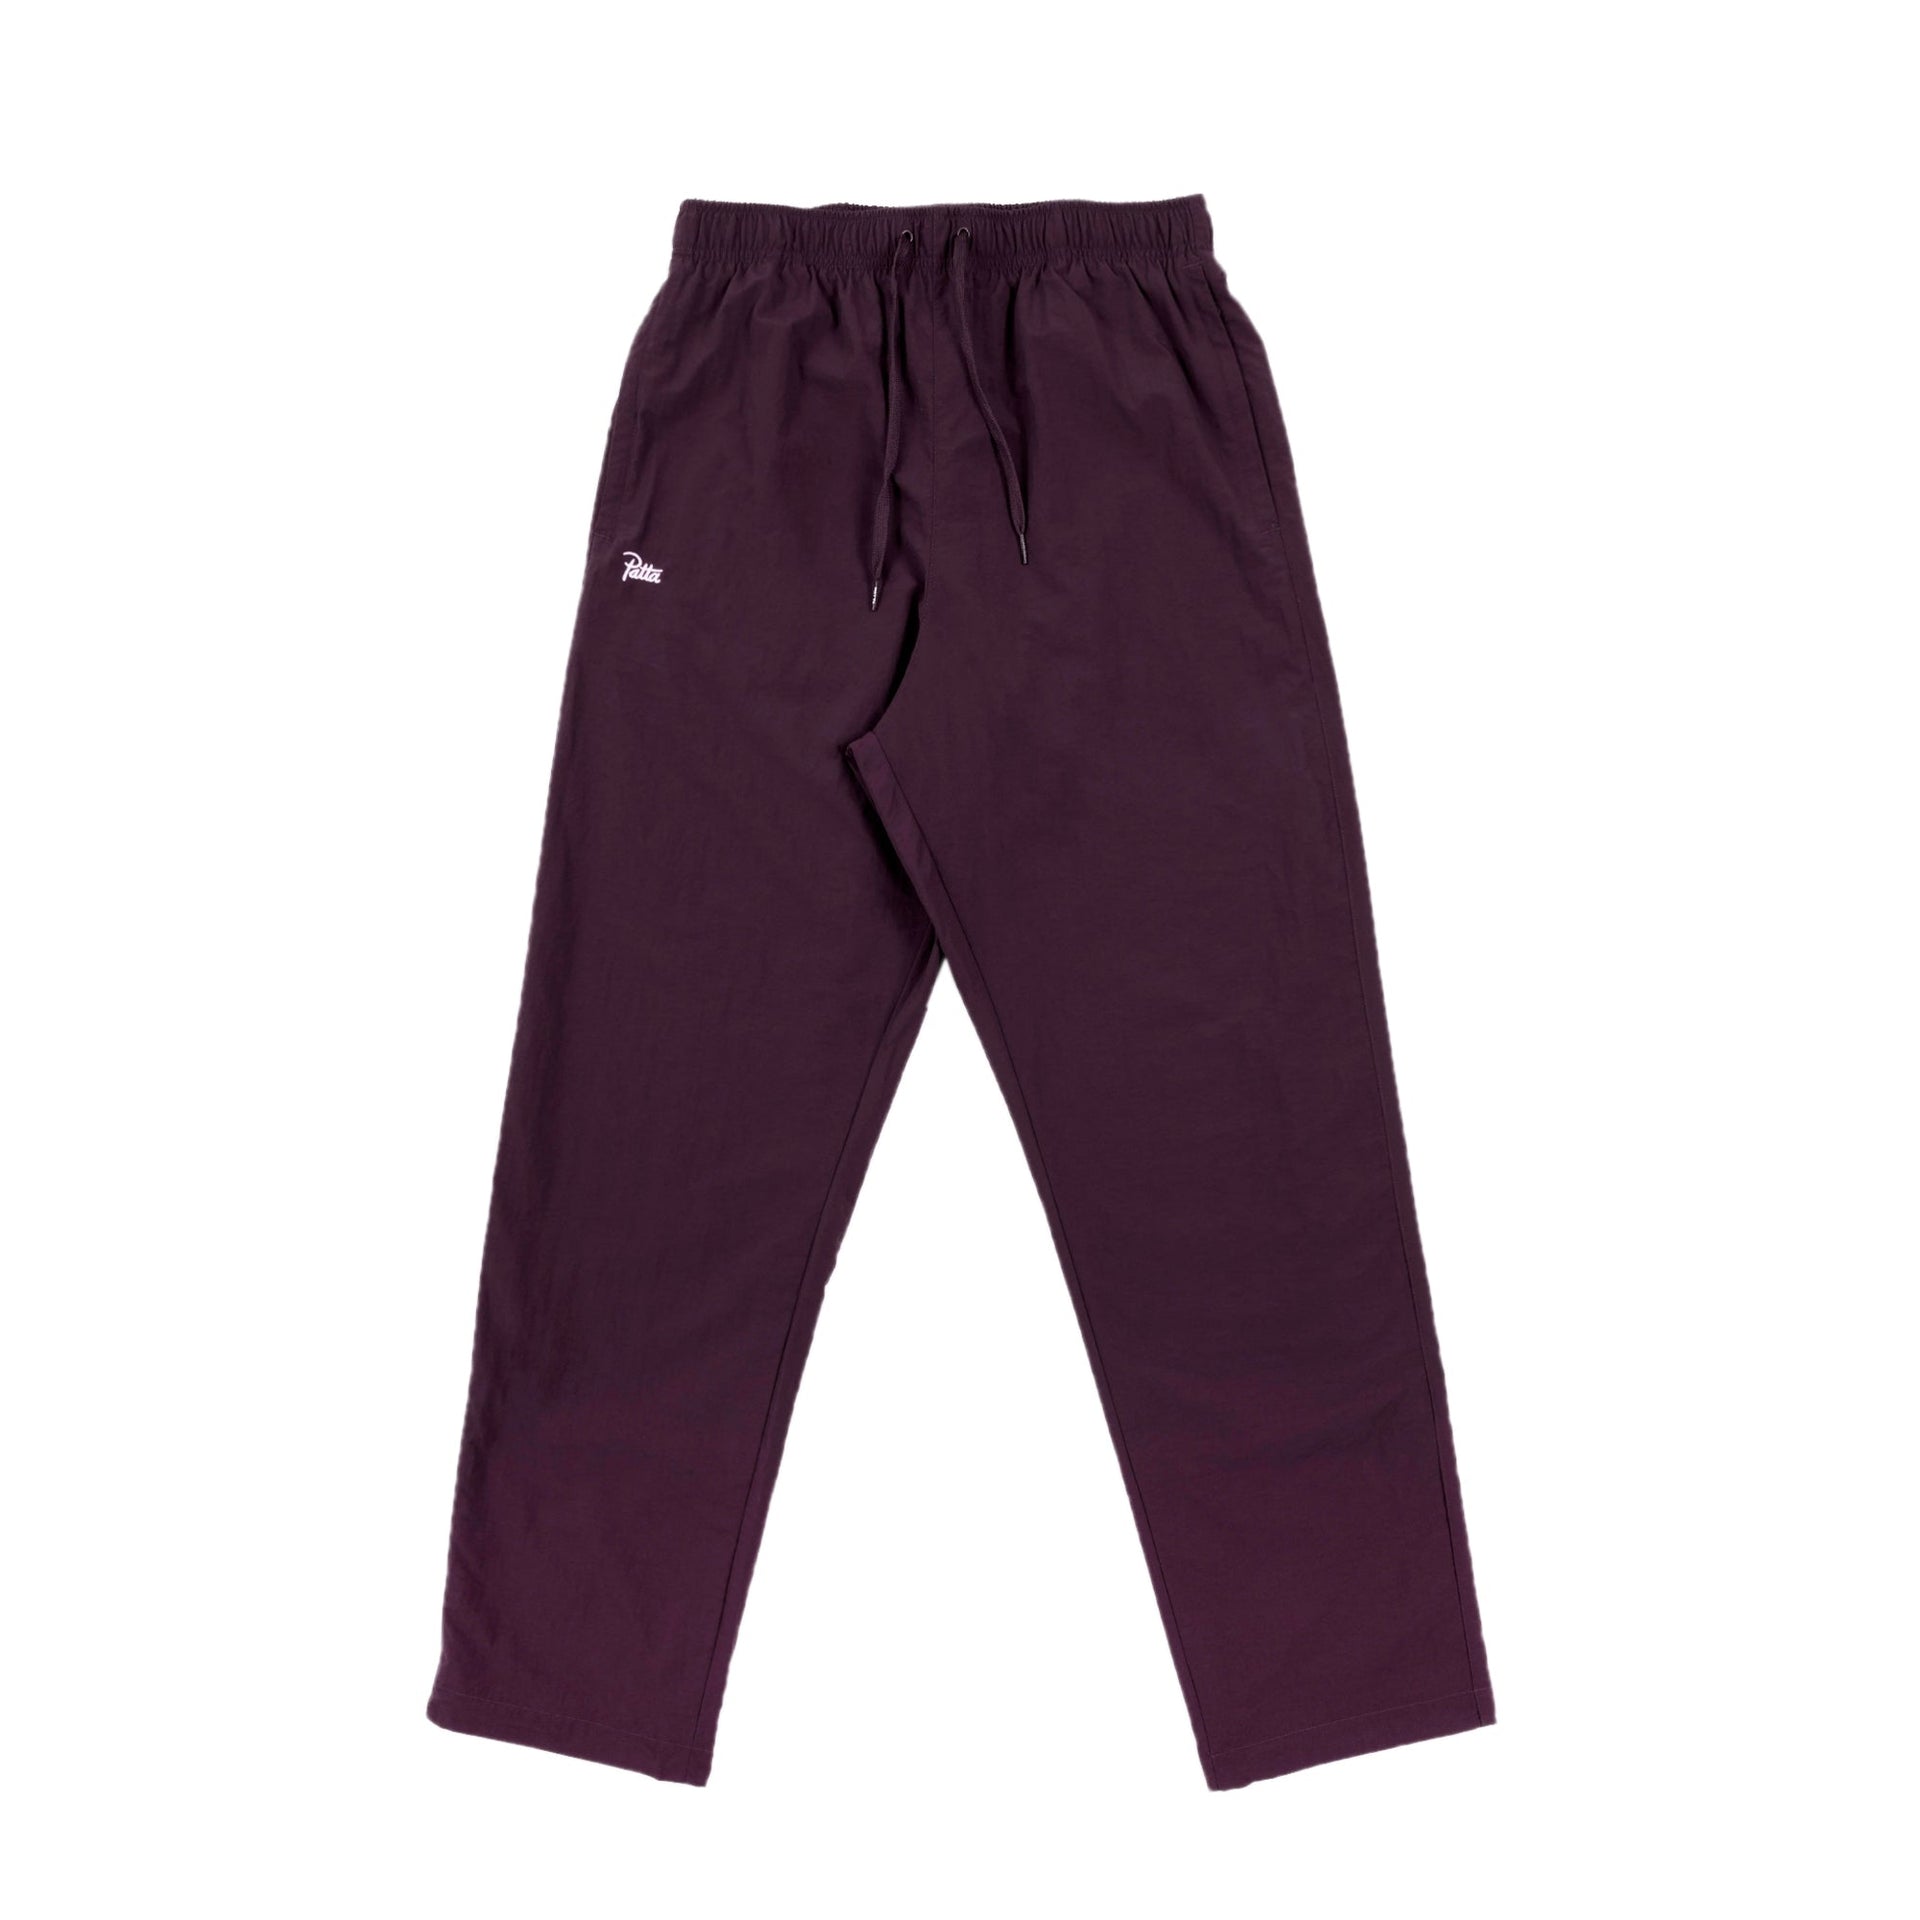 Converse Adidas Track Pants - Buy Converse Adidas Track Pants online in  India